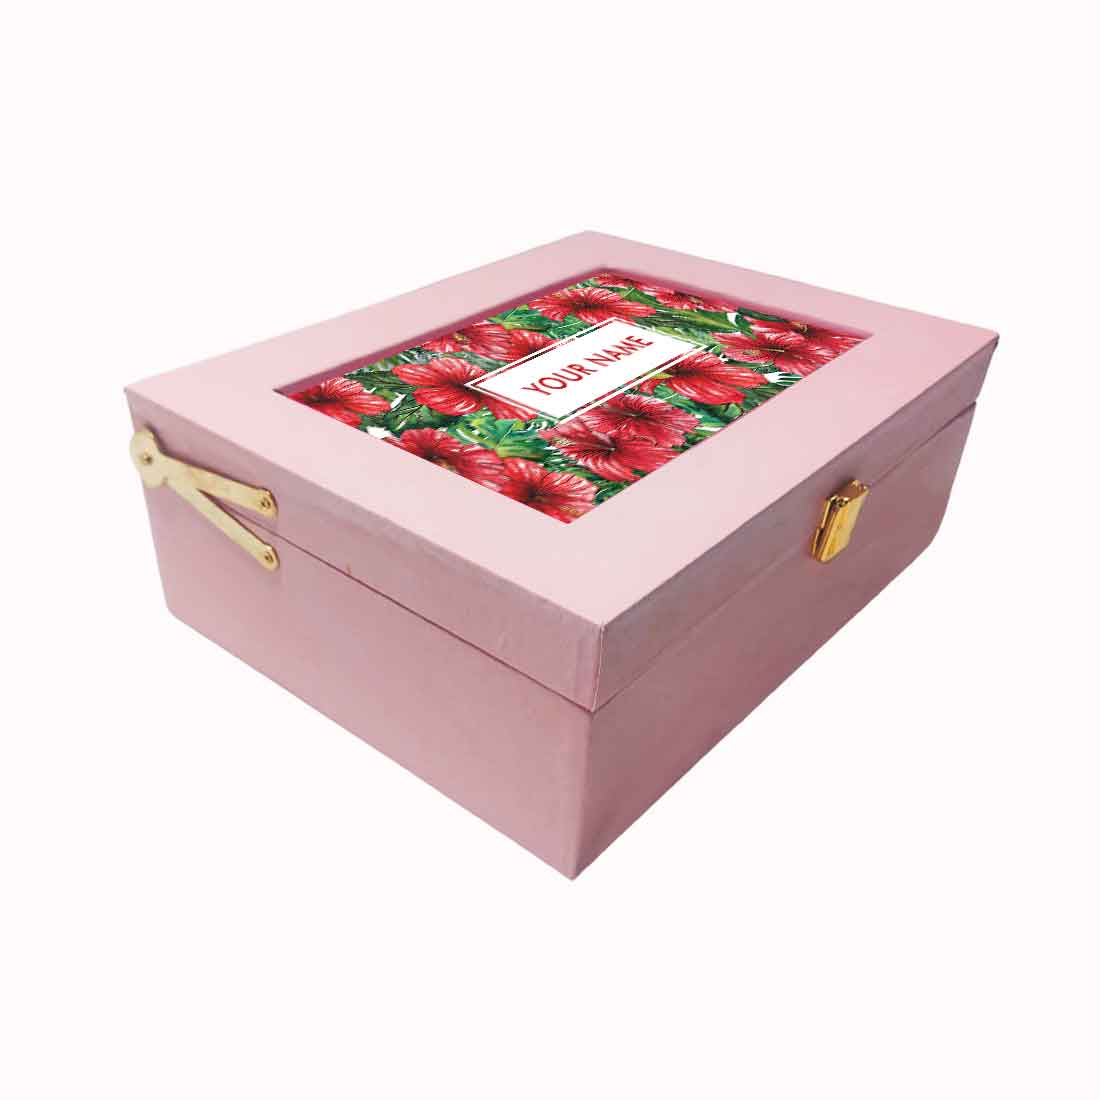 Personalized Best Gift Boxes Vegan Leather Box for Men Women - Hibiscus